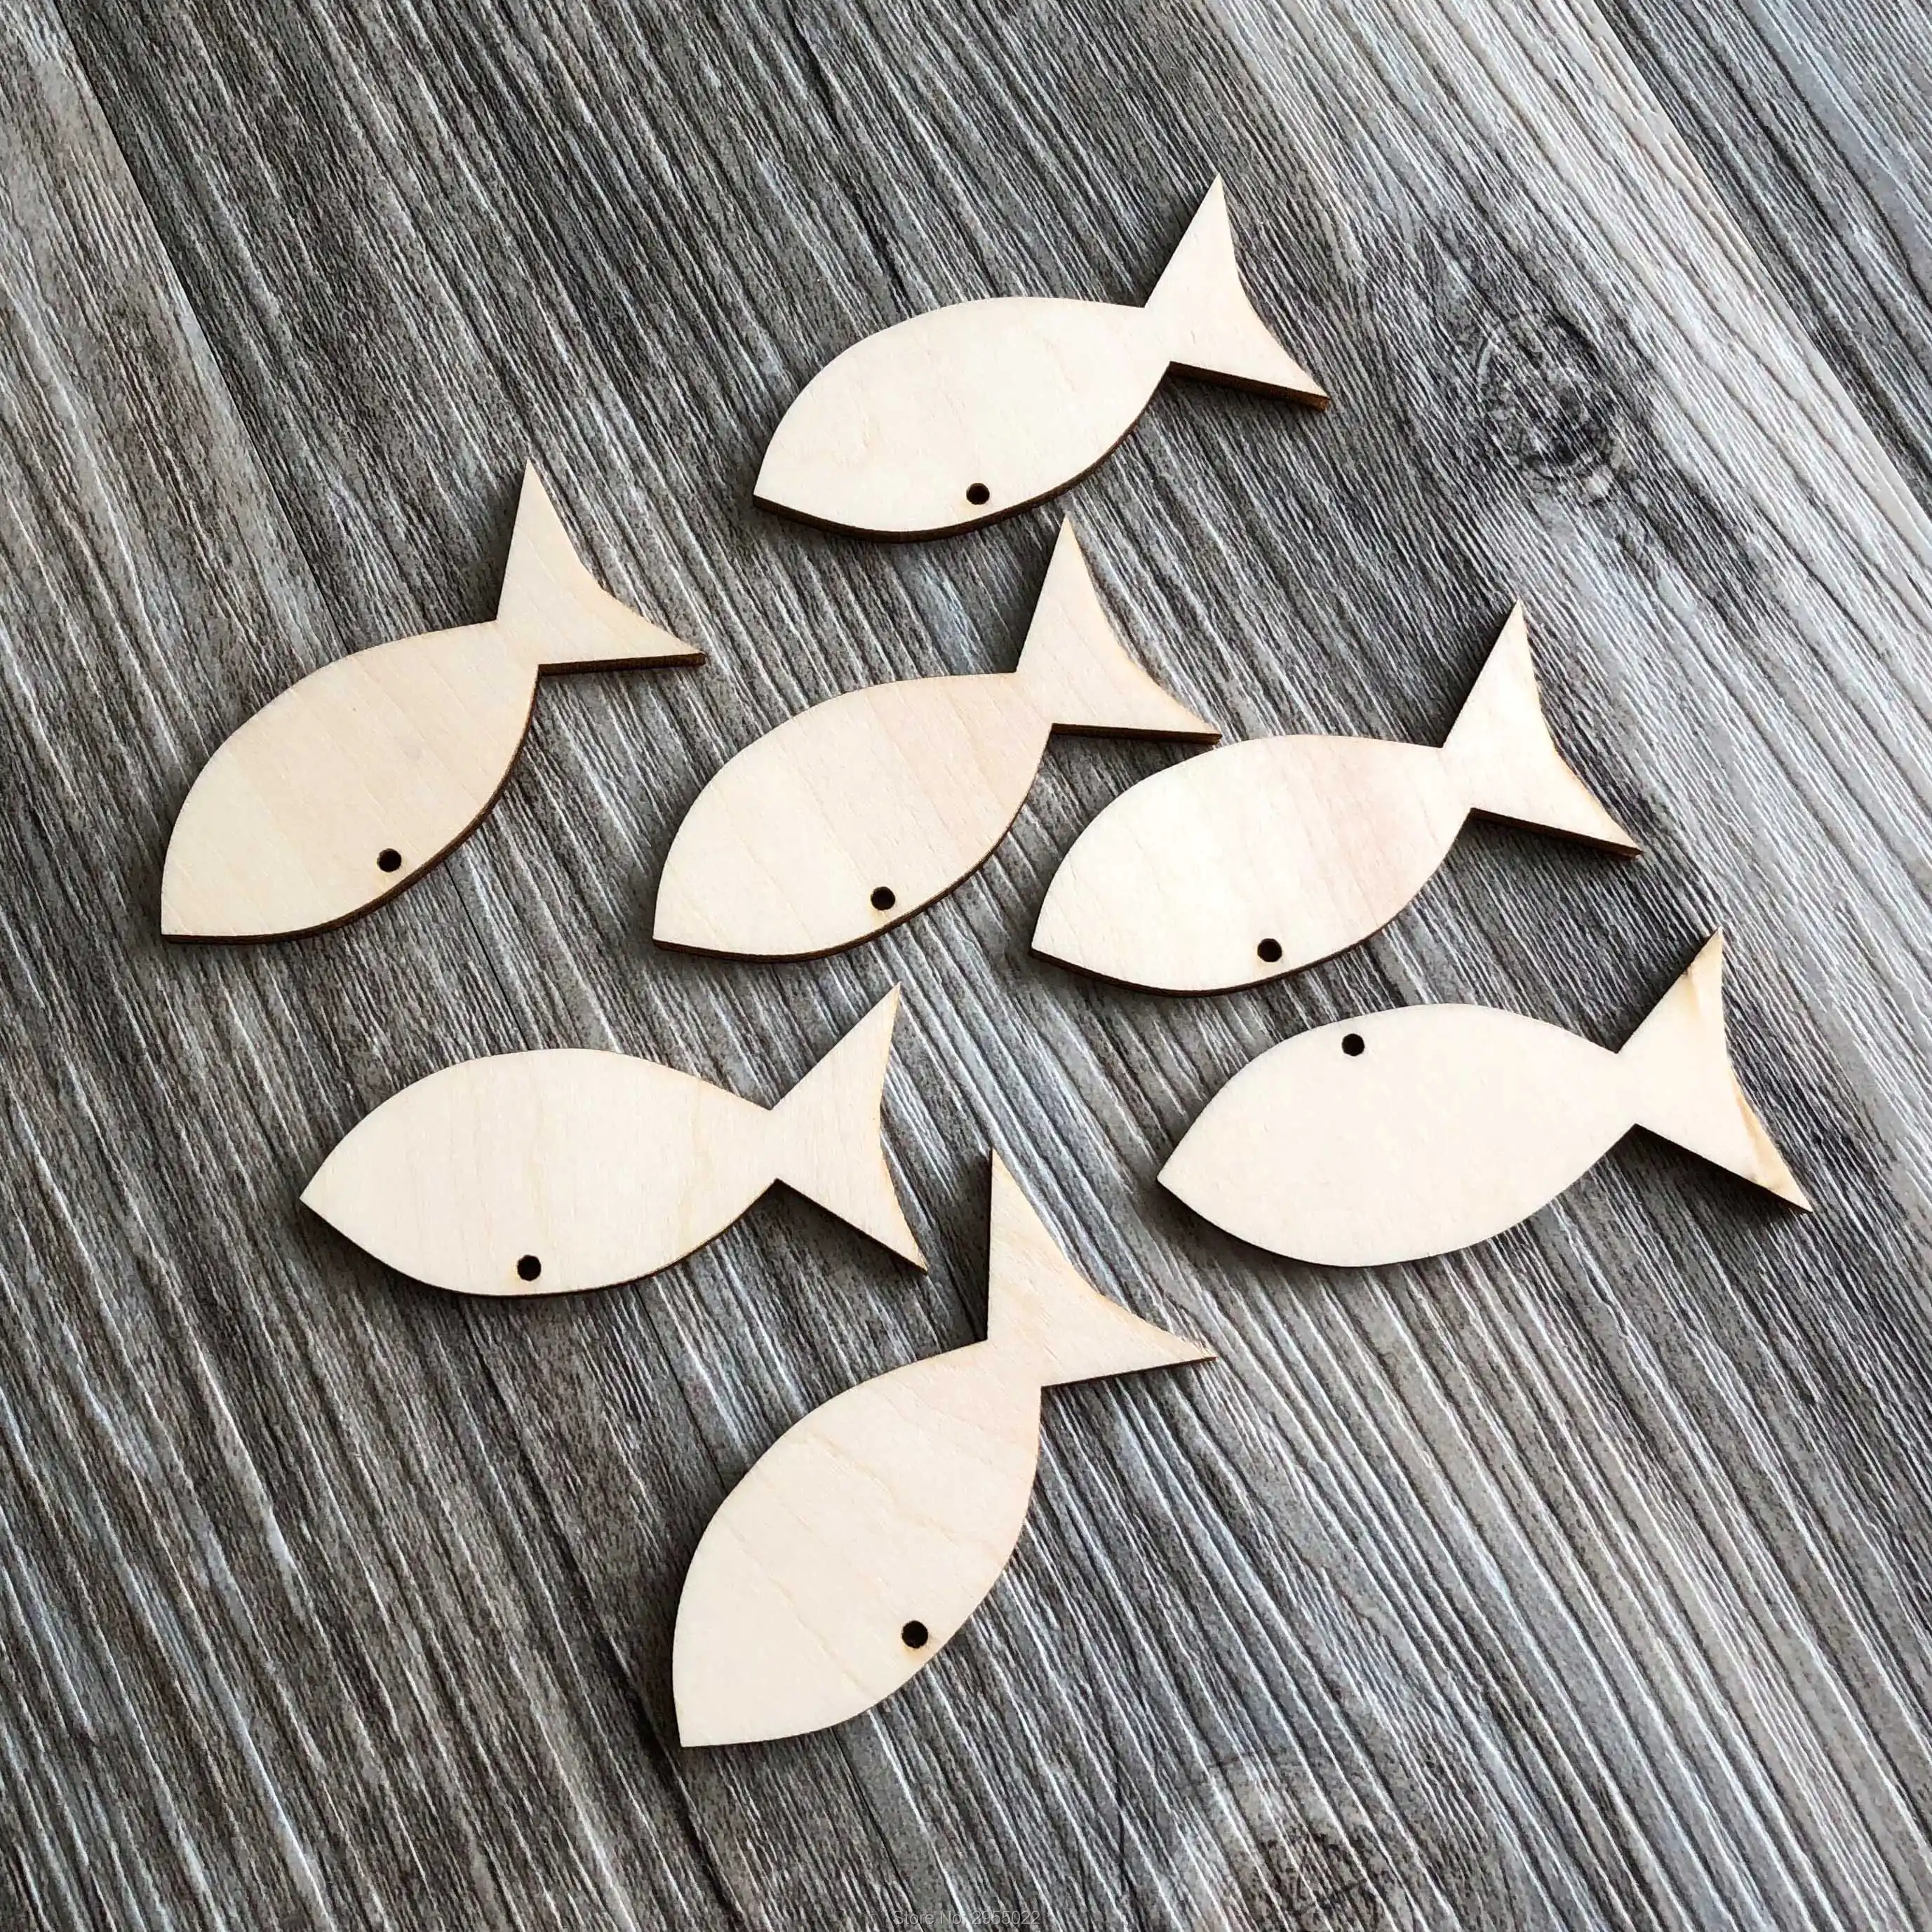 Details about  / Hand Made Wooden Fish Key Tag